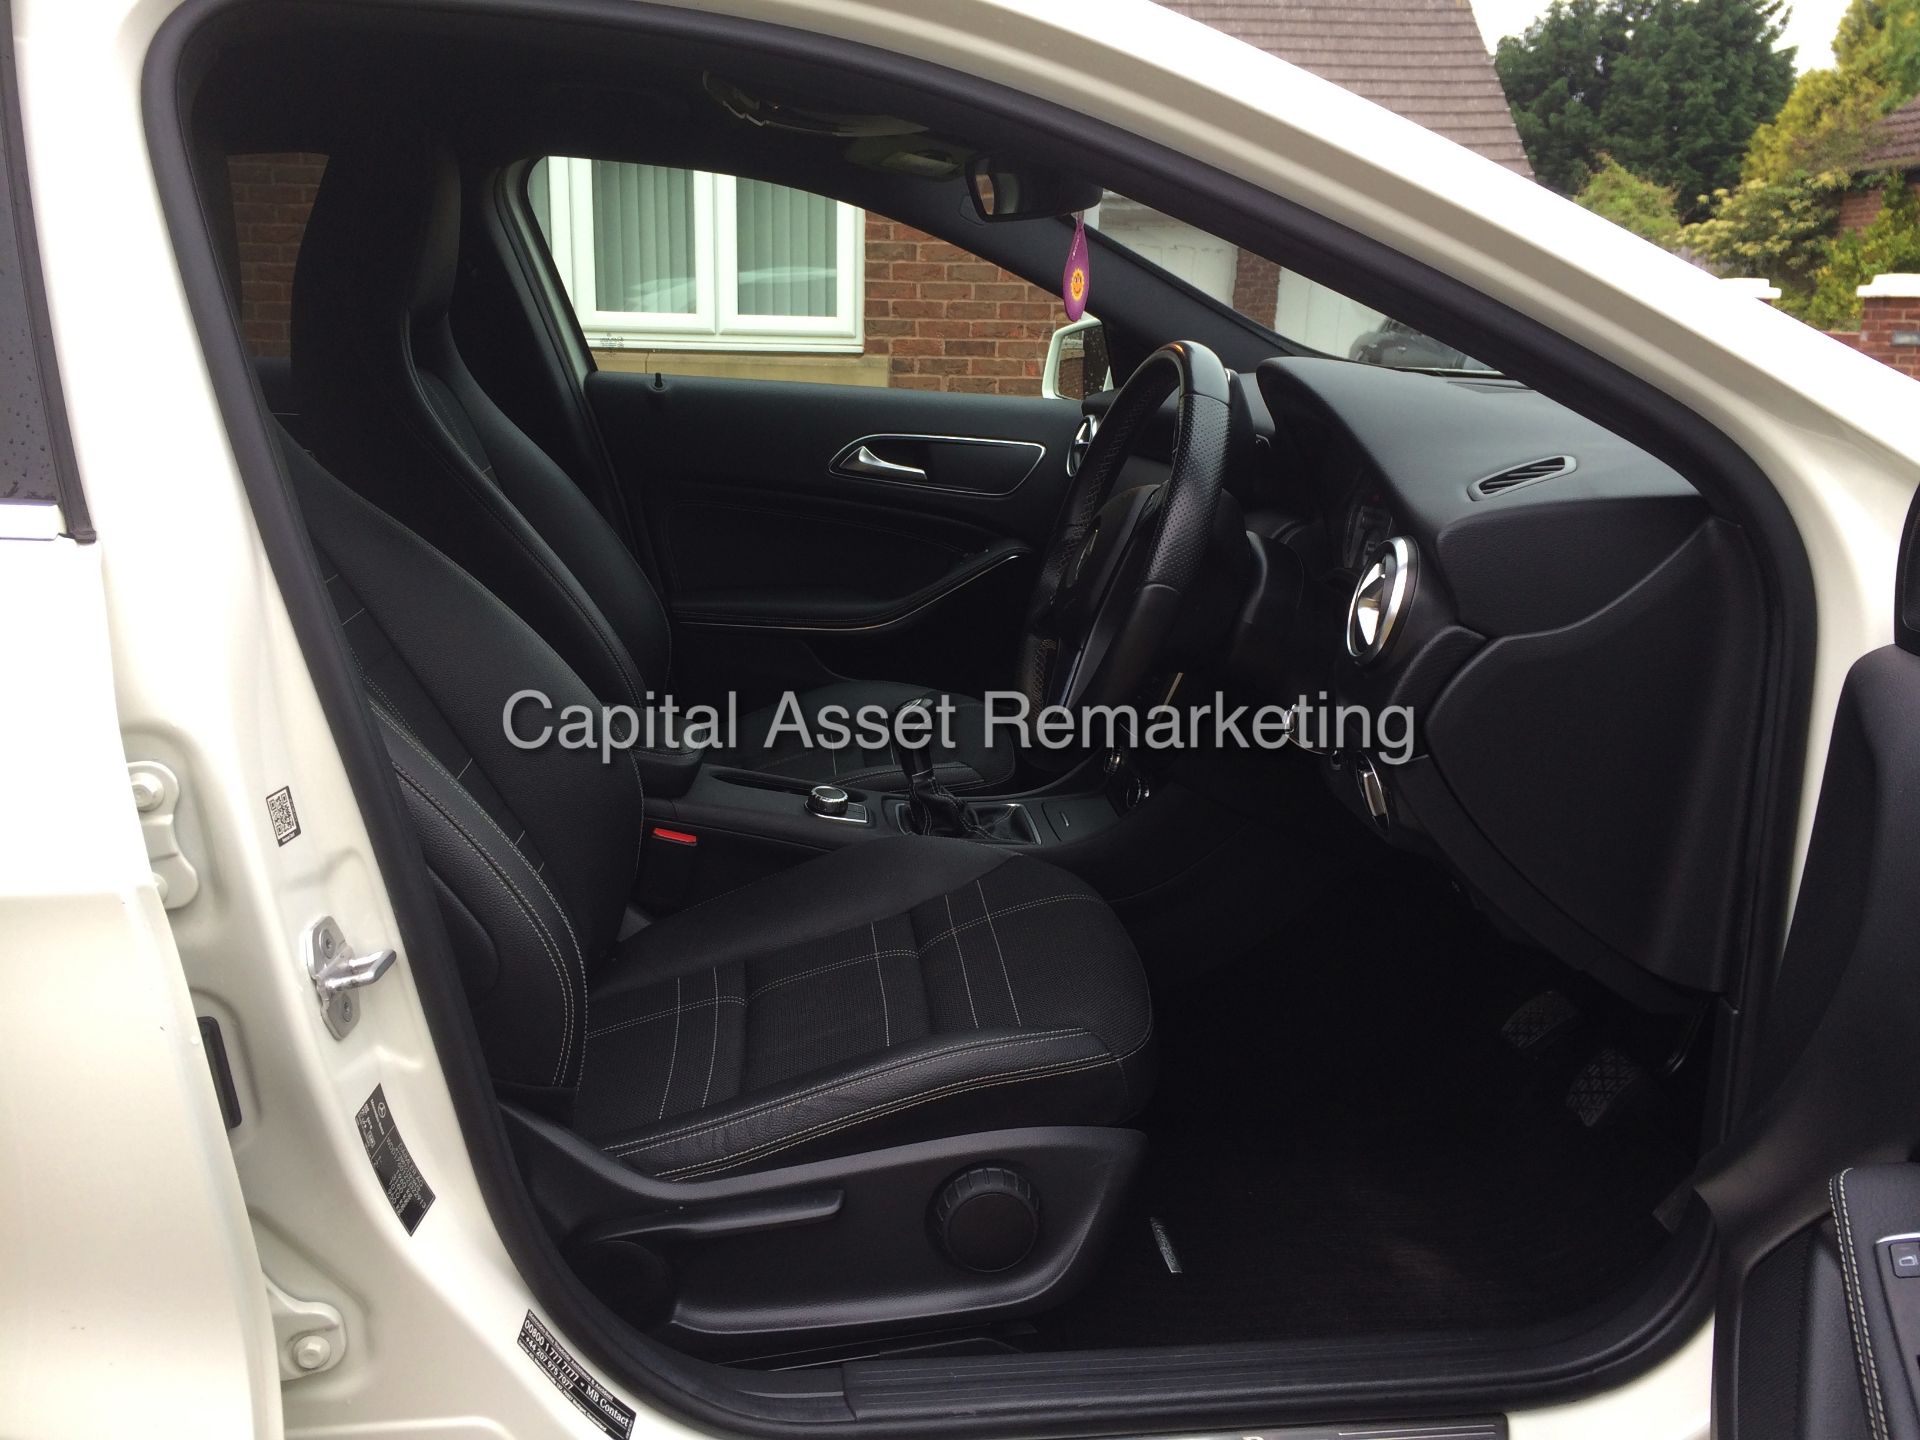 (On Sale) MERCEDES A180cdi "SPORT EDITION" (2015 MODEL) ONLY 25,000 MILES - SAT NAV -PARTIAL LEATHER - Image 7 of 18